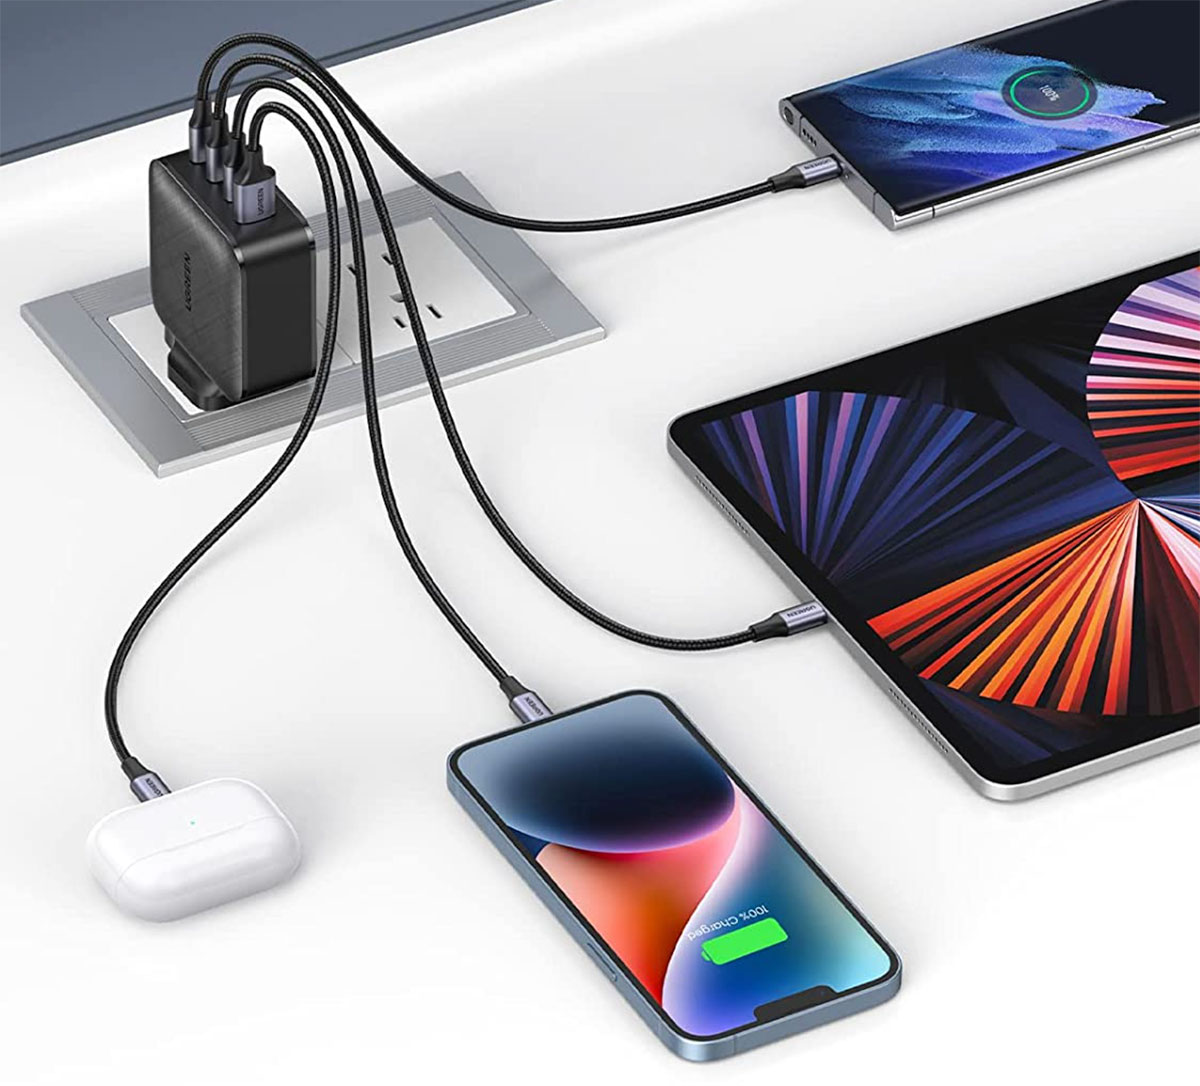 USB-C wall charger charging multiple devices